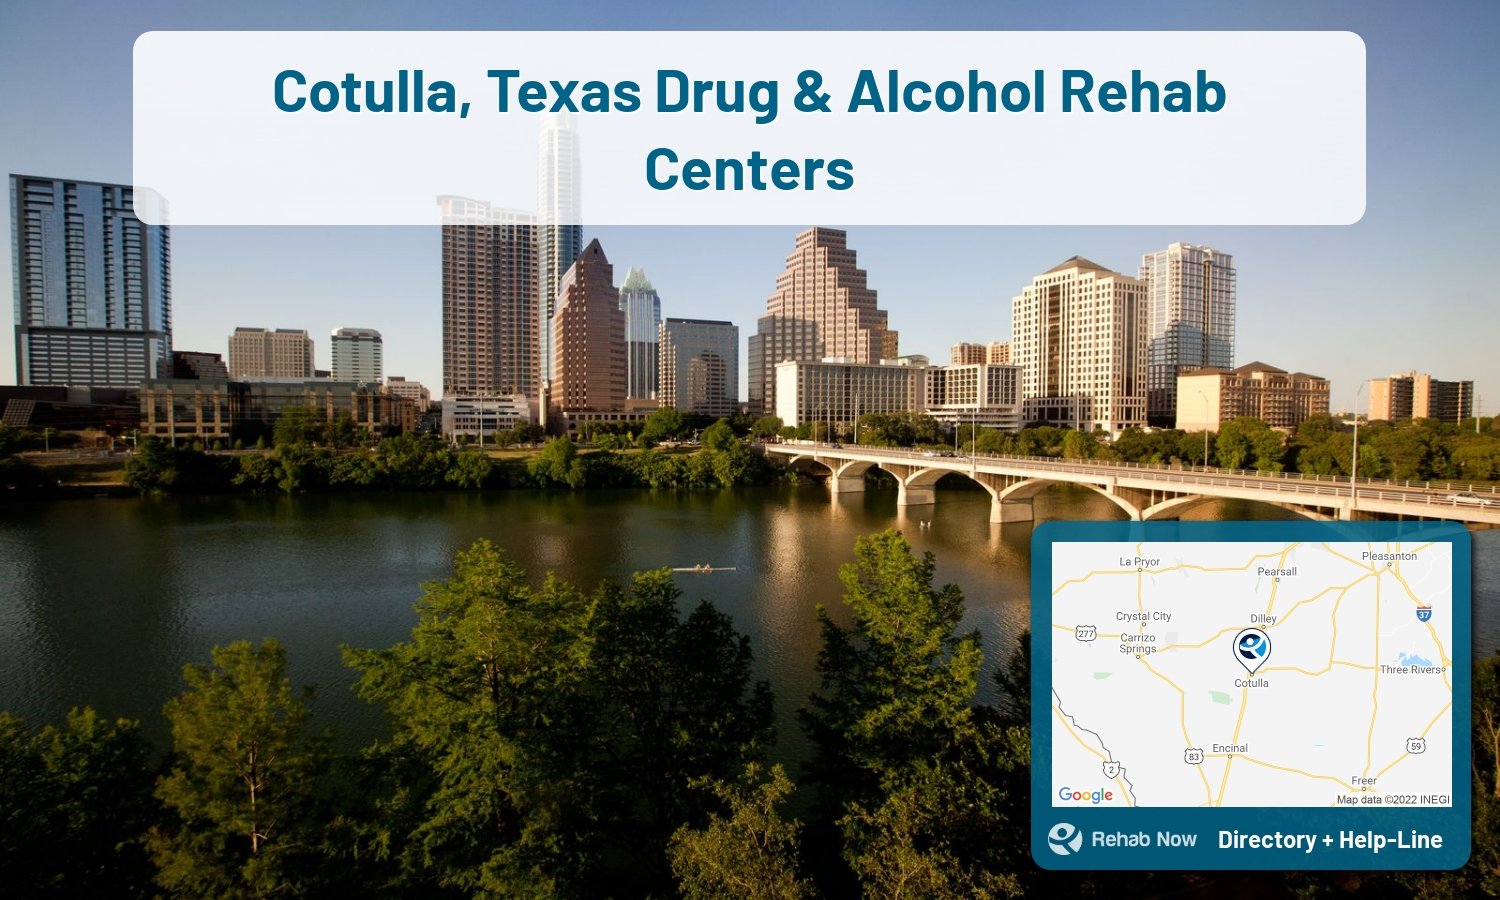 Our experts can help you find treatment now in Cotulla, Texas. We list drug rehab and alcohol centers in Texas.